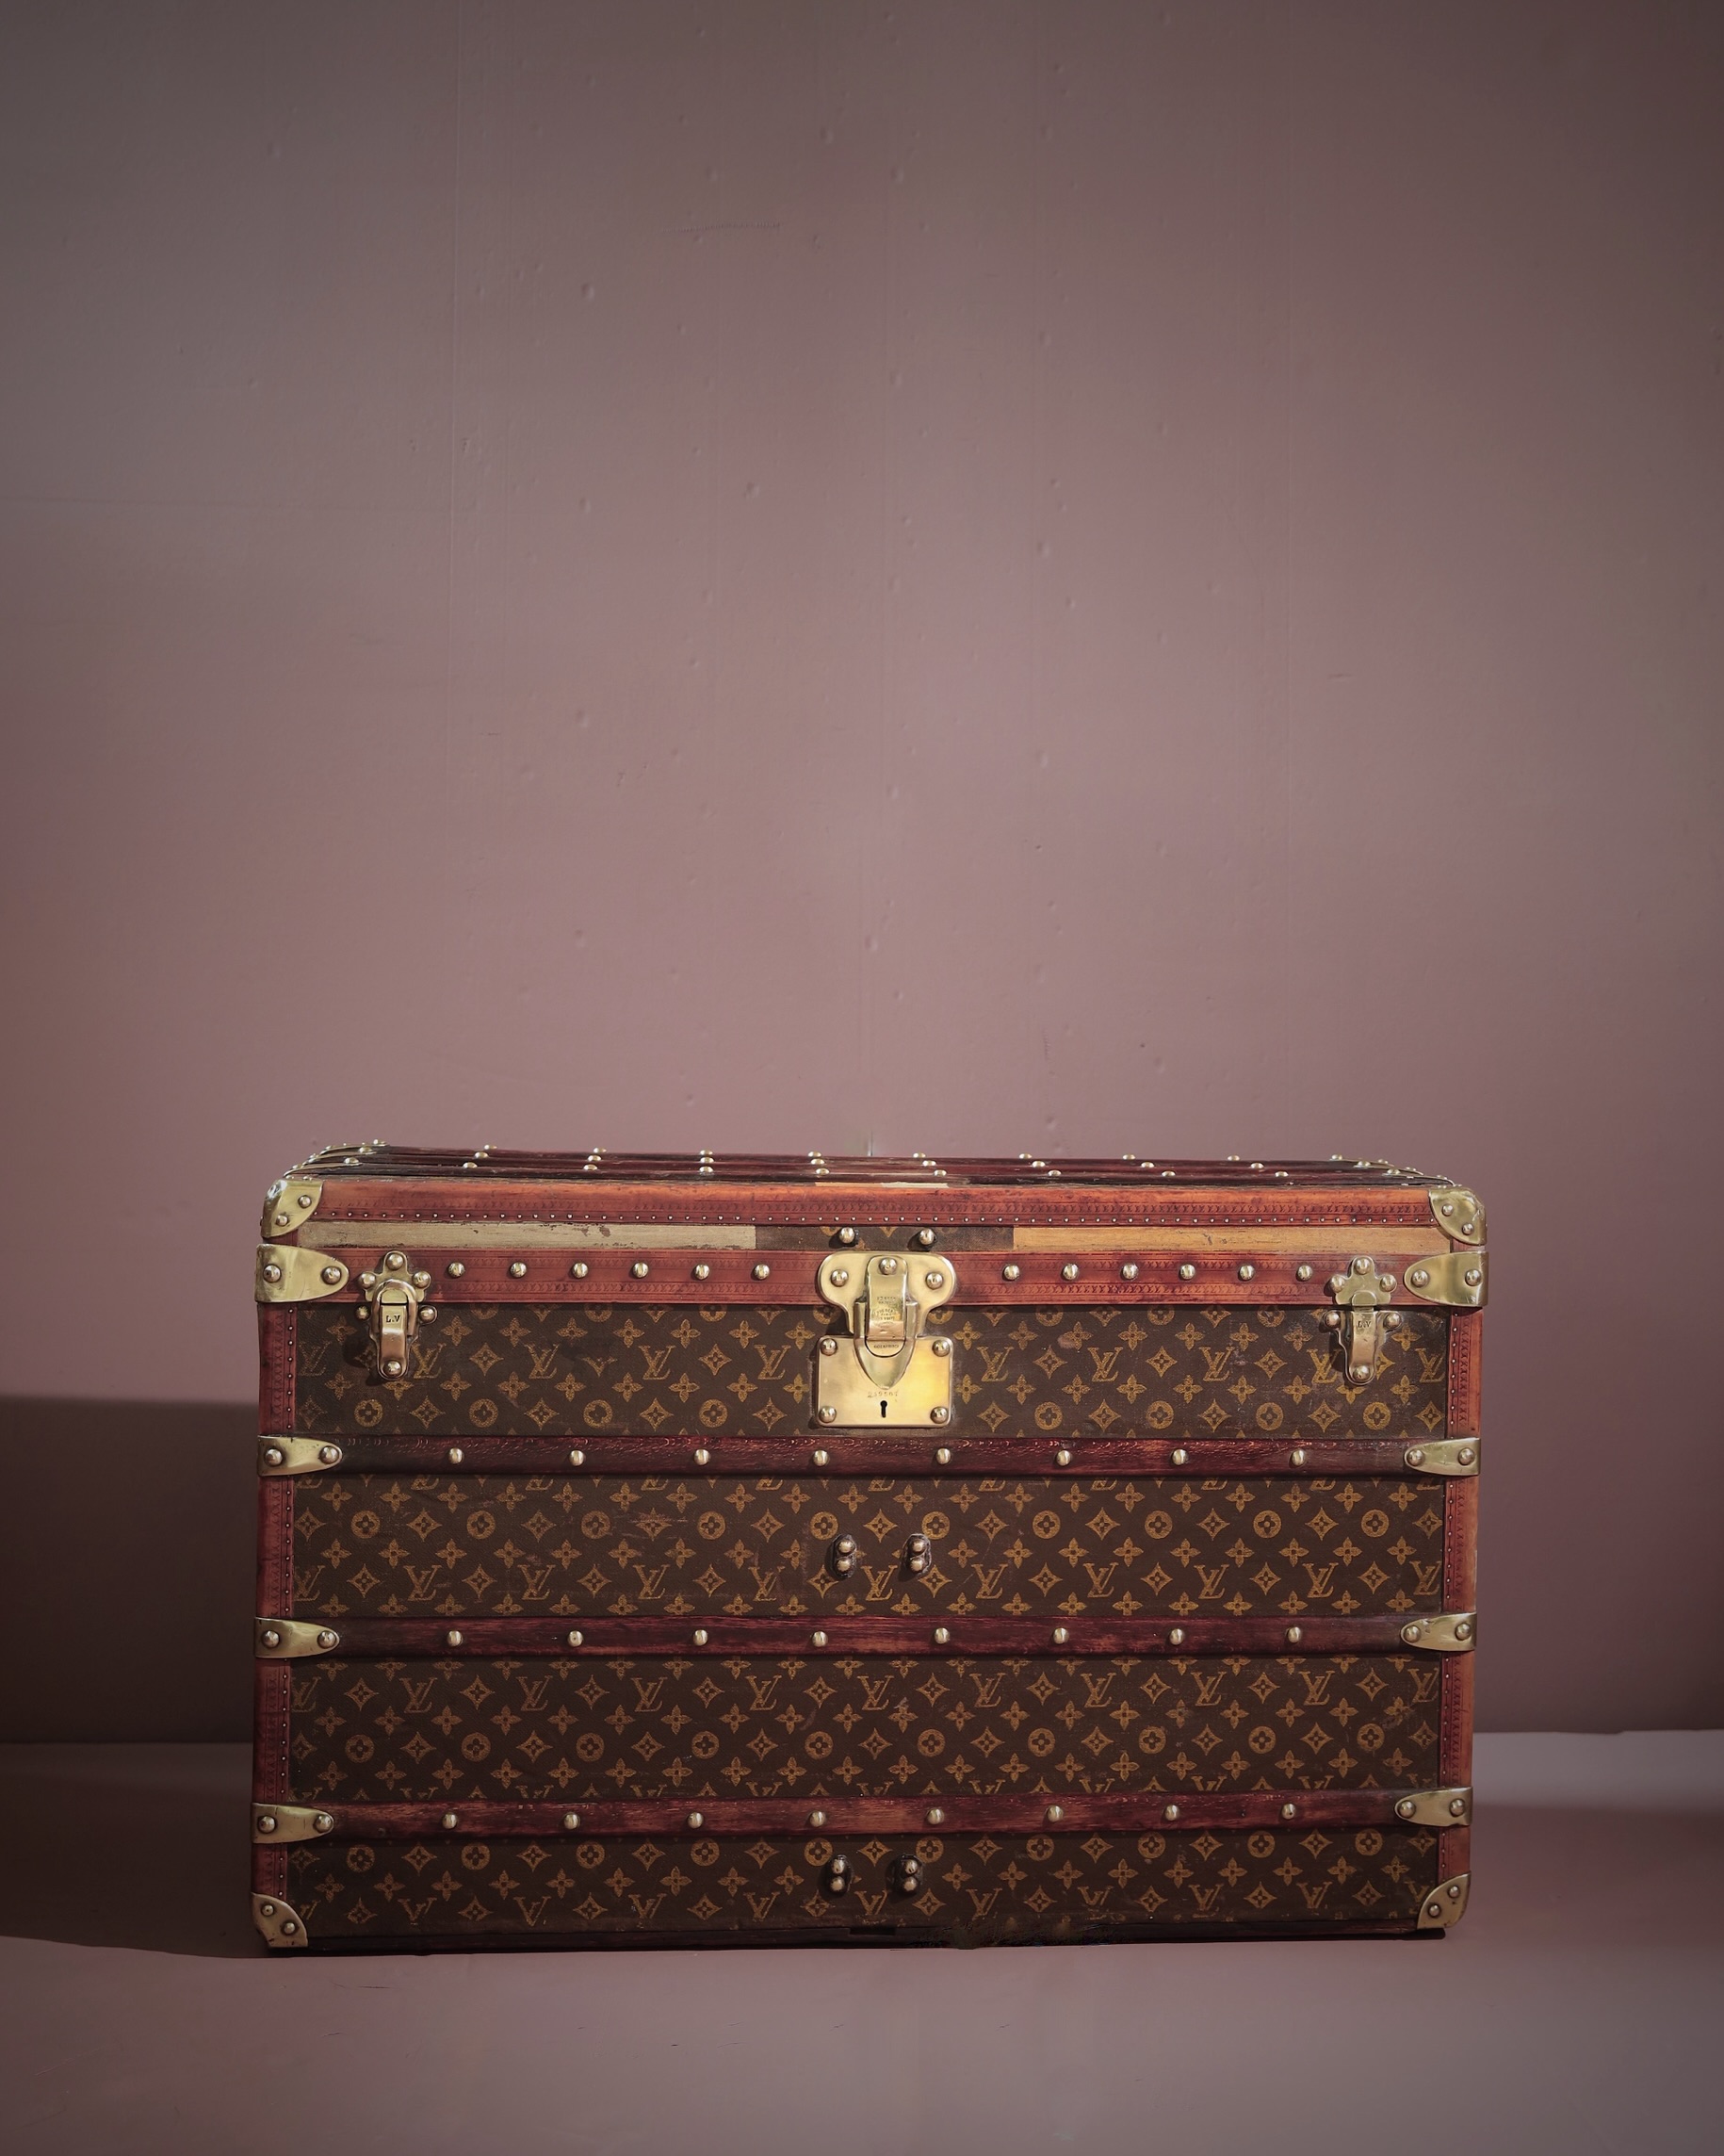 he-well-traveled-trunk-louis-vuitton-thumbnail-product-5772-1